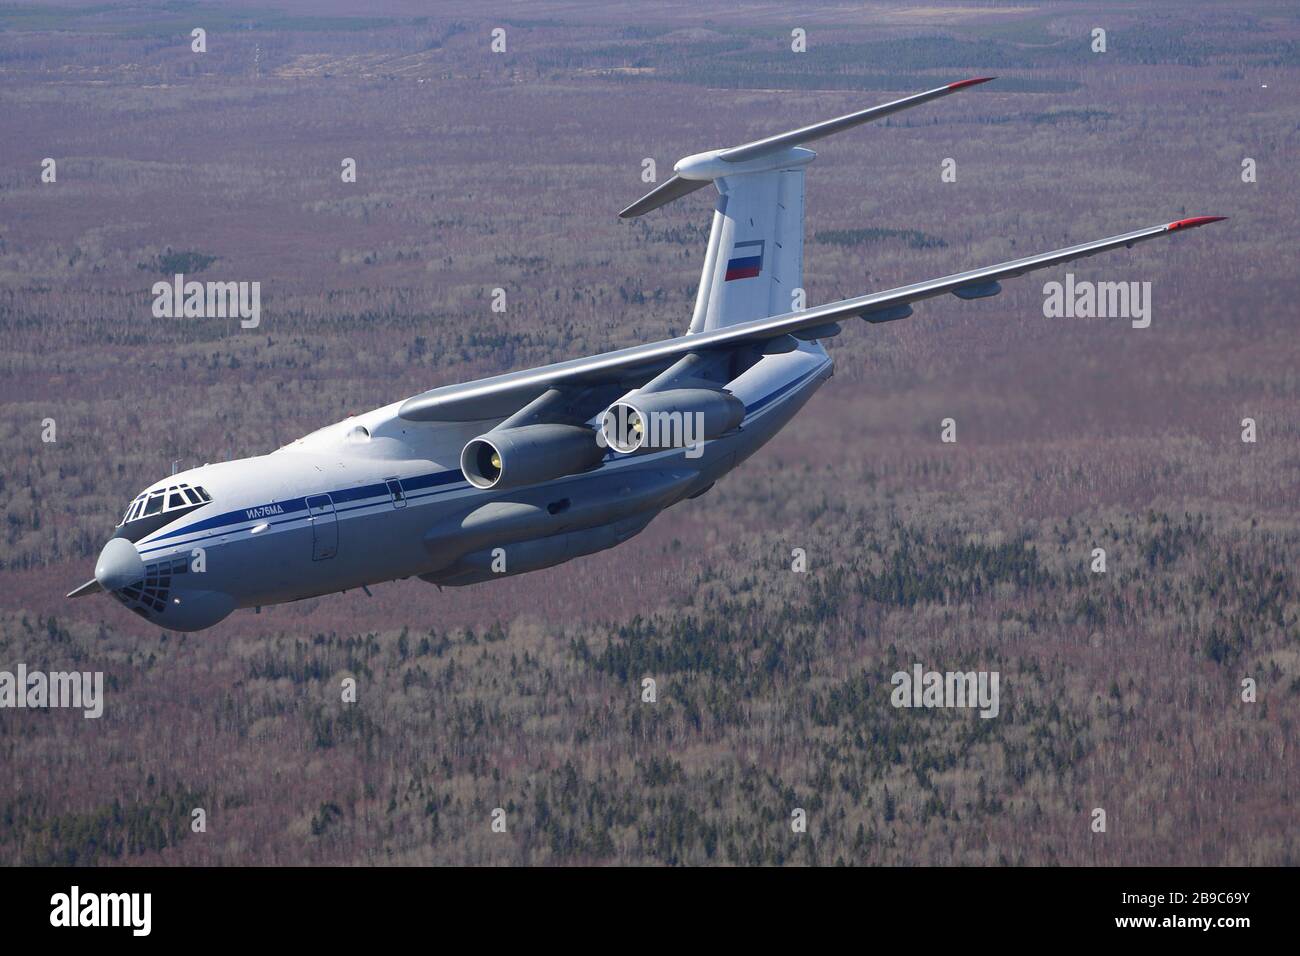 IL-76MD military transport aircraft of the Russian Air Force over Russia. Stock Photo